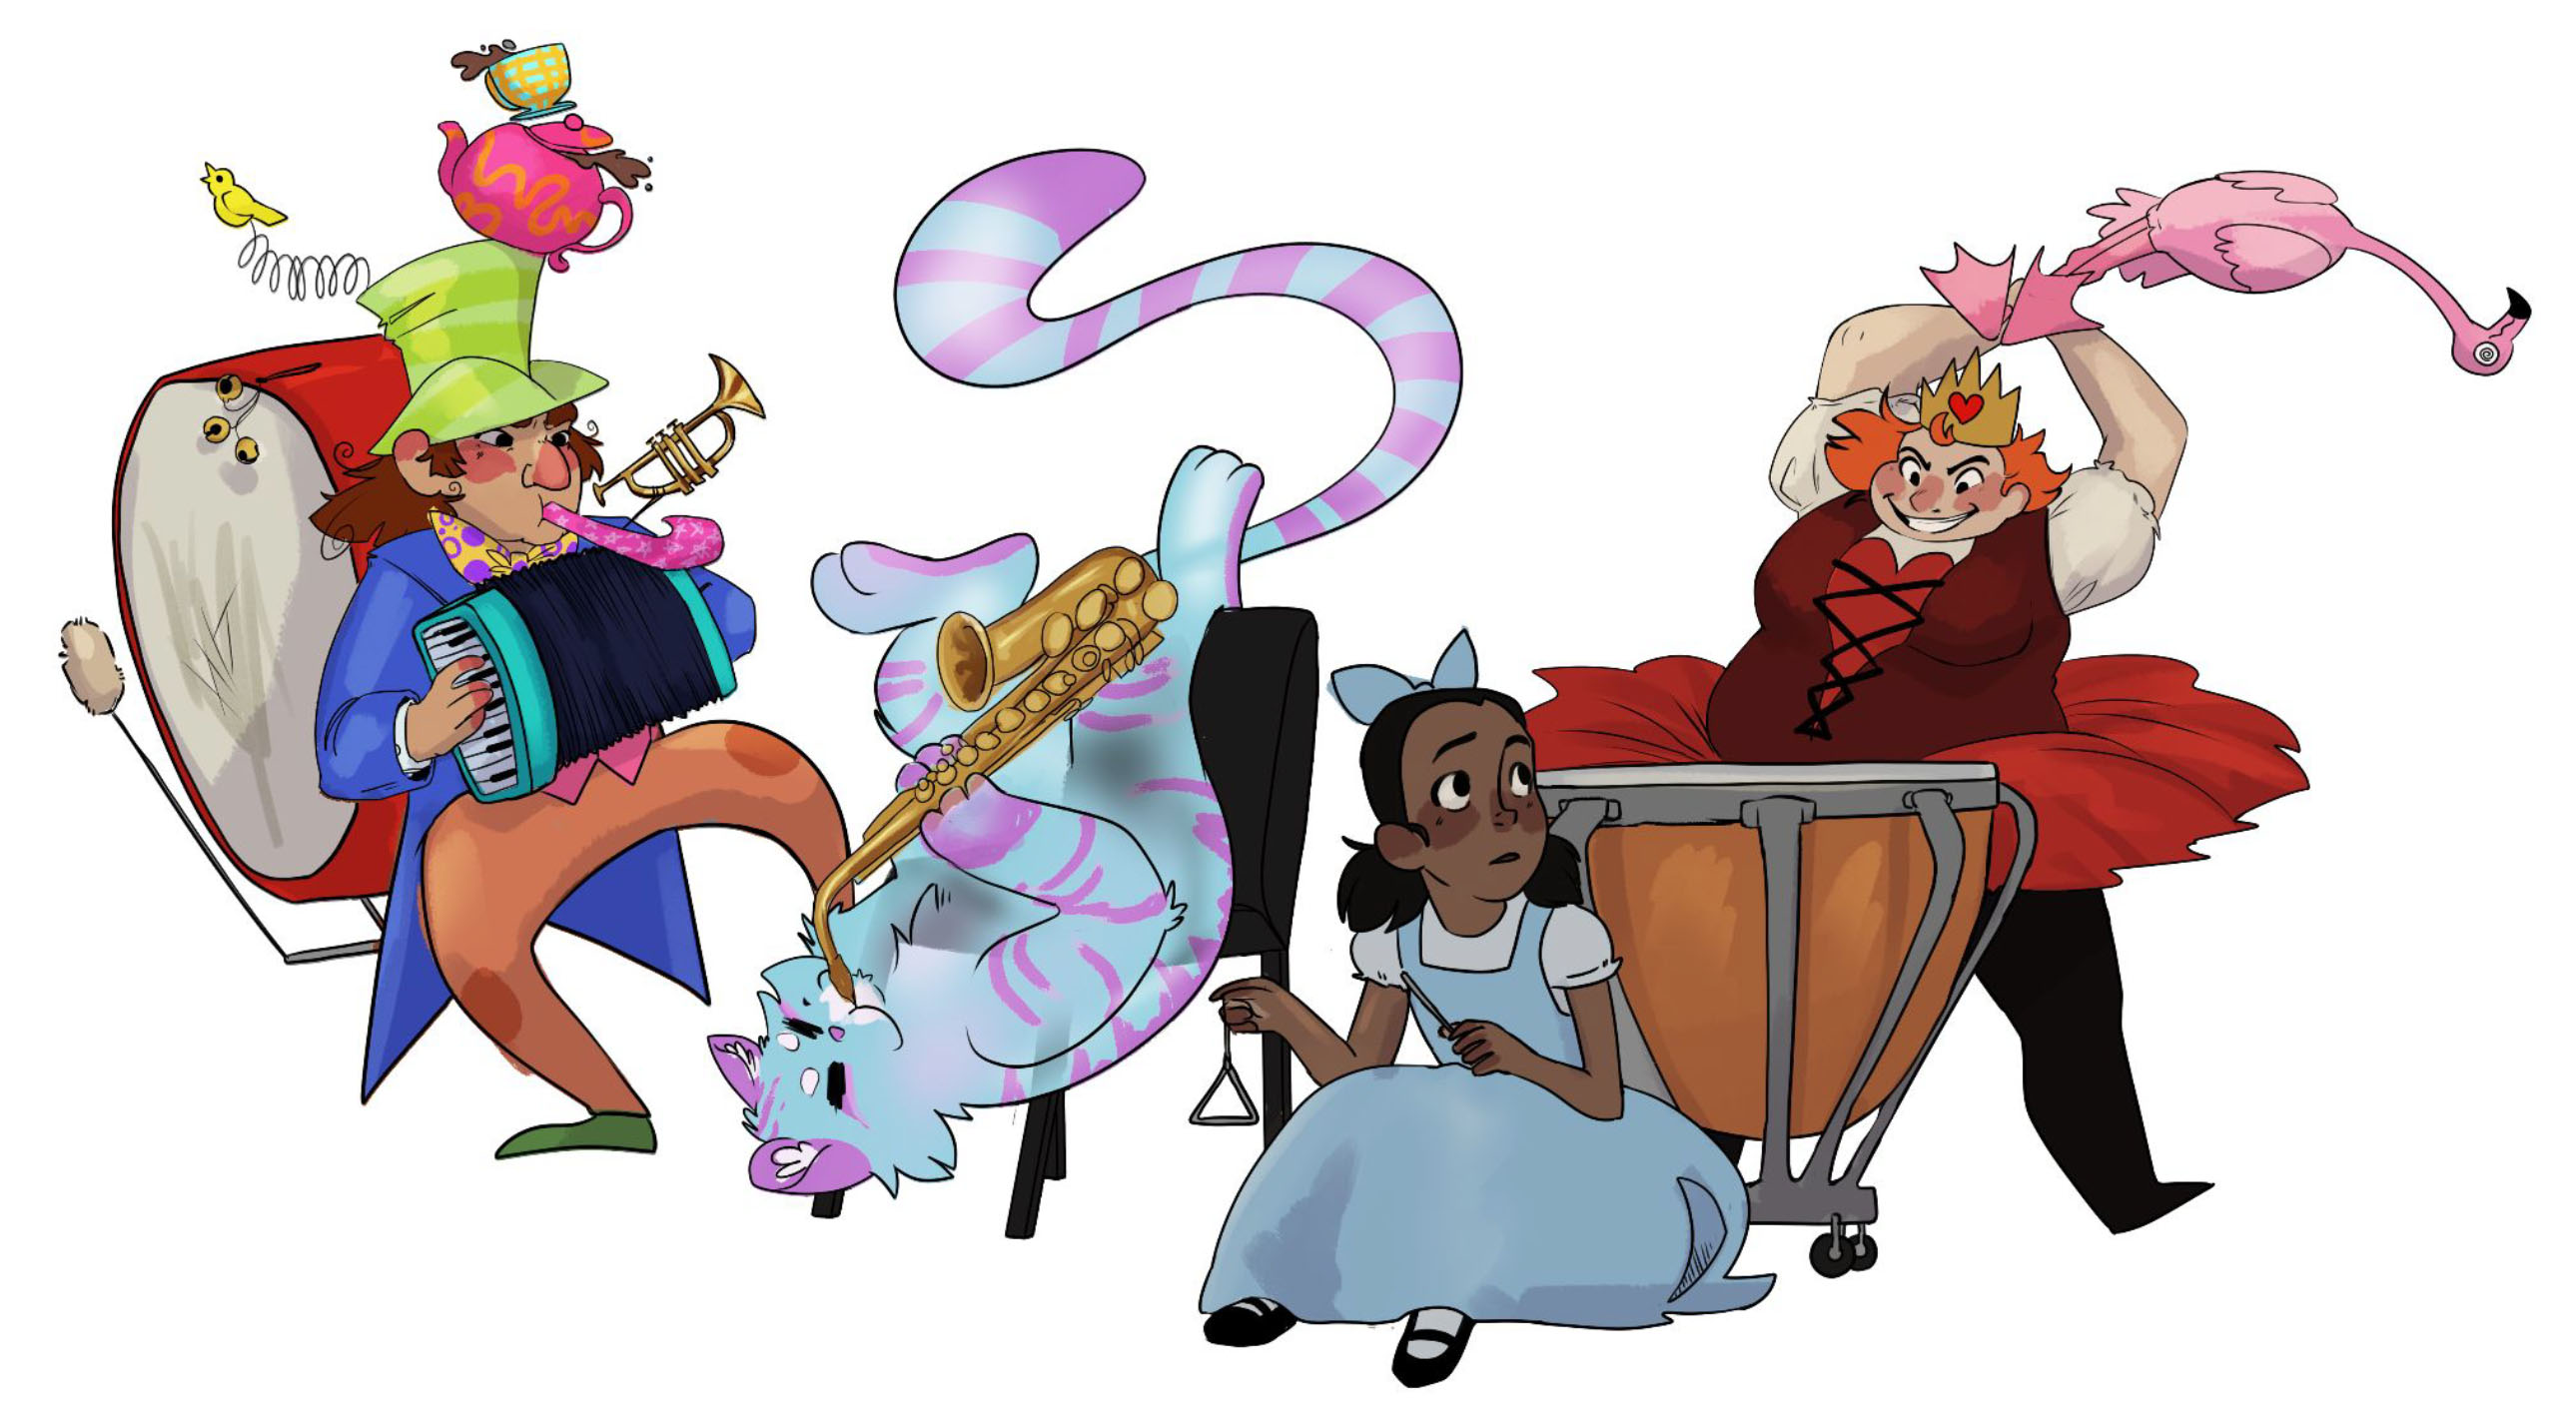 An illustration of Alice in Wonderland characters playing instruments.